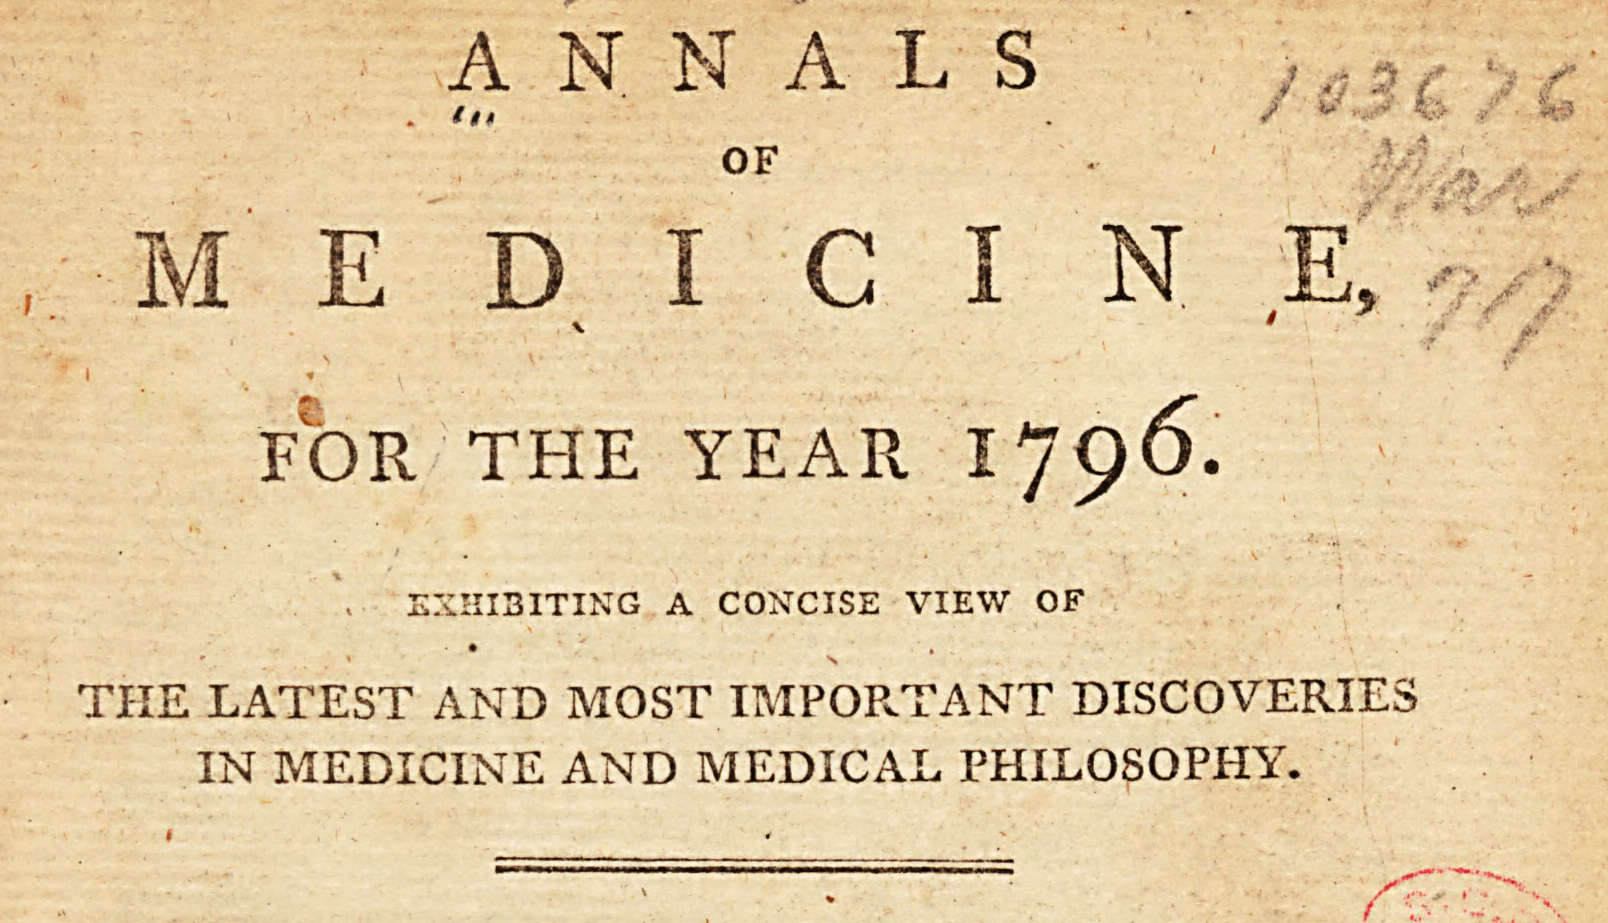 Image: Scanned portion of masthead from the Annals of Medicine for the year 1796. Includes the text, Exhibiting a concise view of the latest and most important discoveries in medicine and medical philosophy. Also has a handwritten note in pencil in the upper right corner that says 103676 Mar 77.